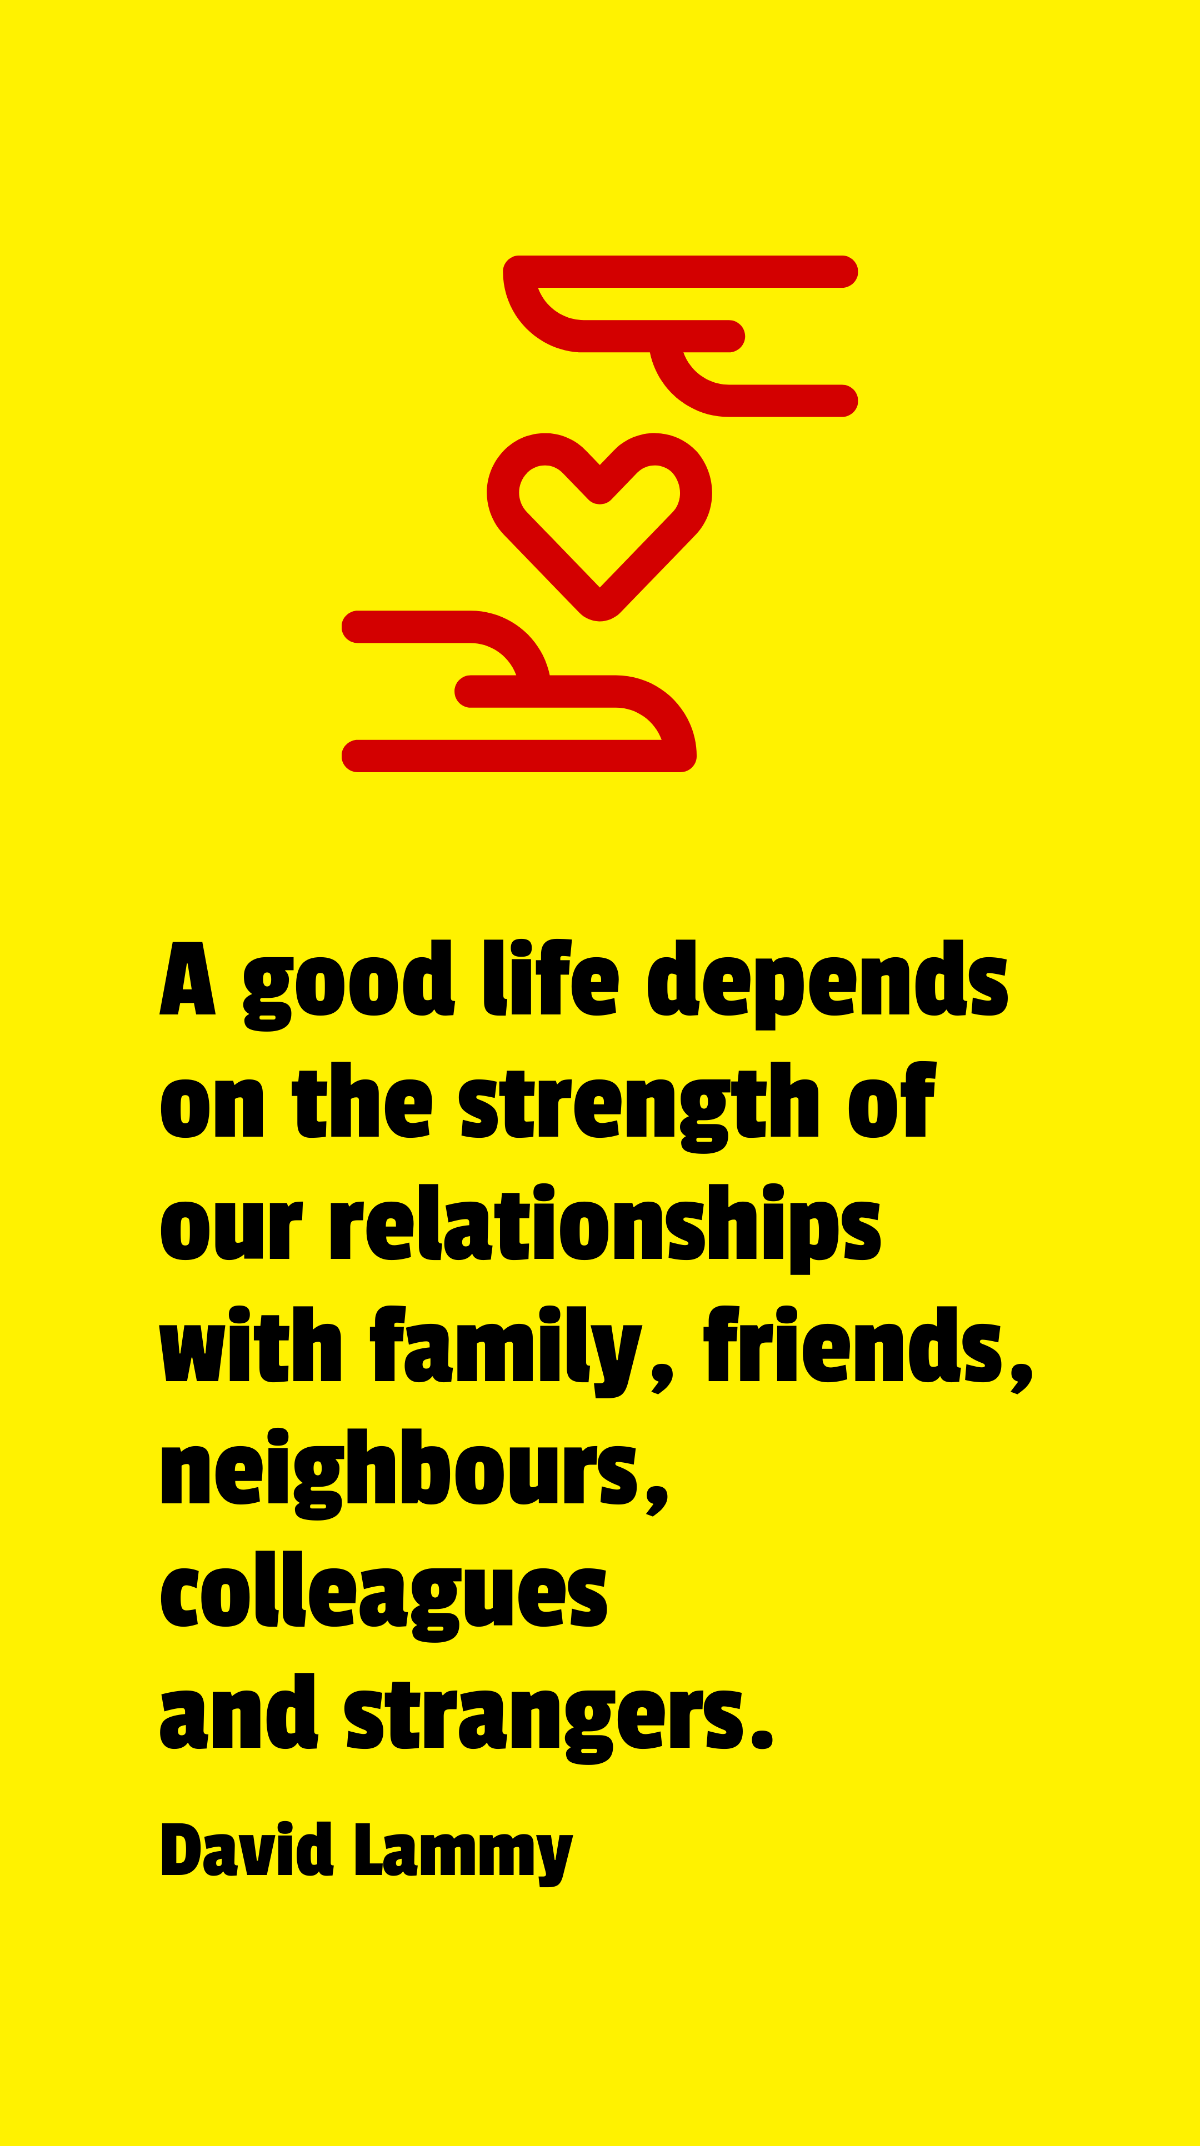 David Lammy - A good life depends on the strength of our relationships with family, friends, neighbours, colleagues and strangers. Template